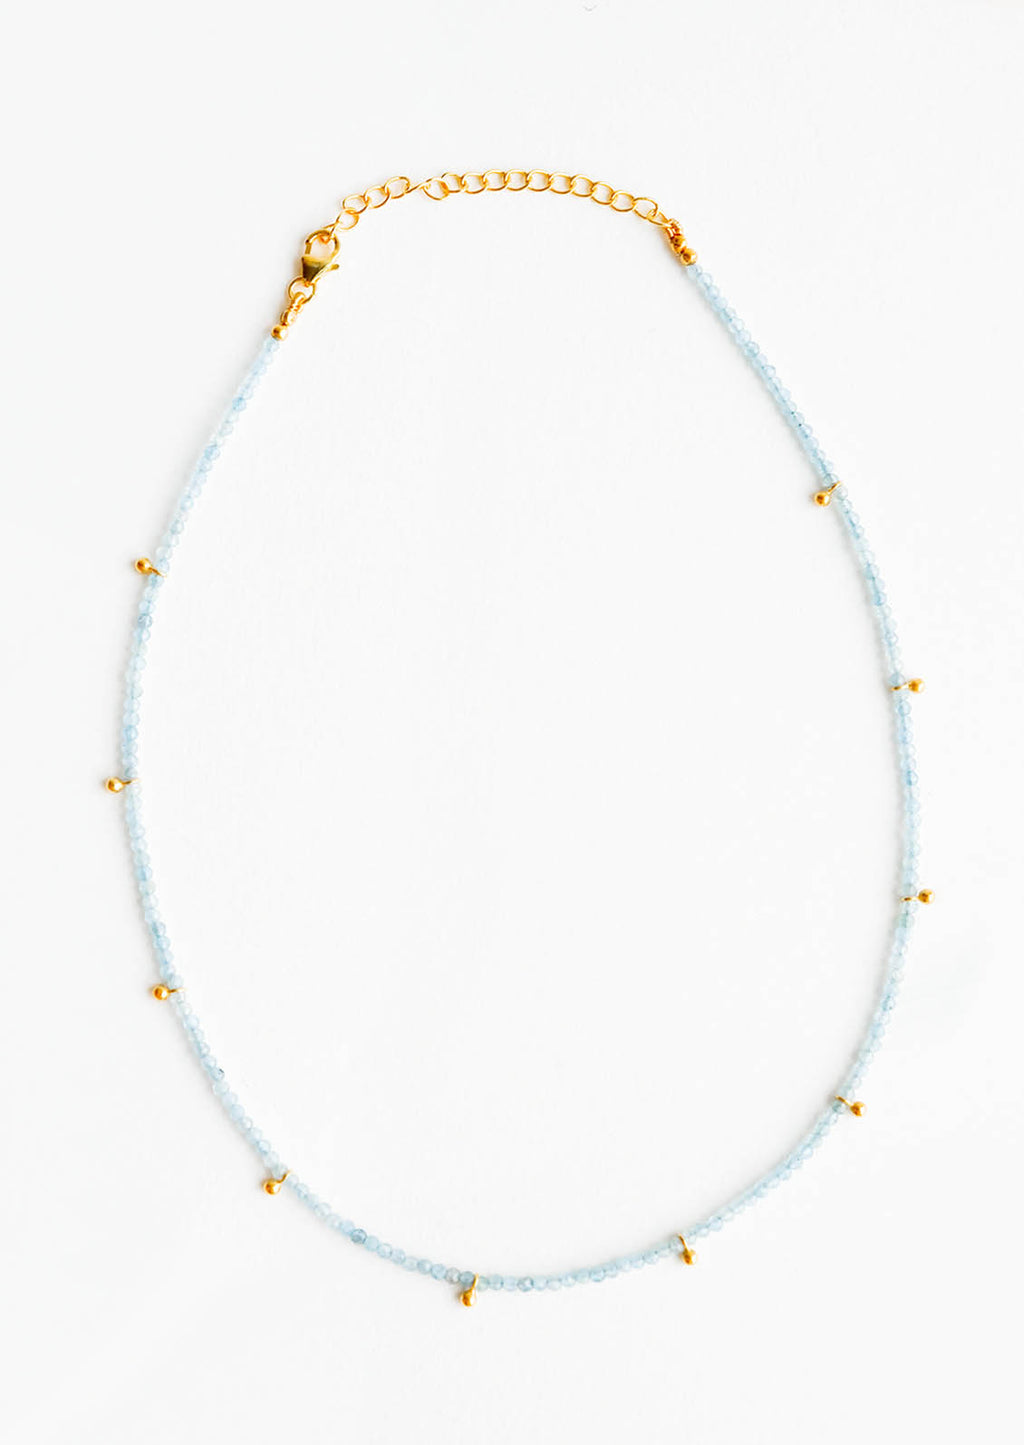 Aqua Chalcedony: A necklace of clear blue stones with evenly spaced gold beads and a golden chain clasp.